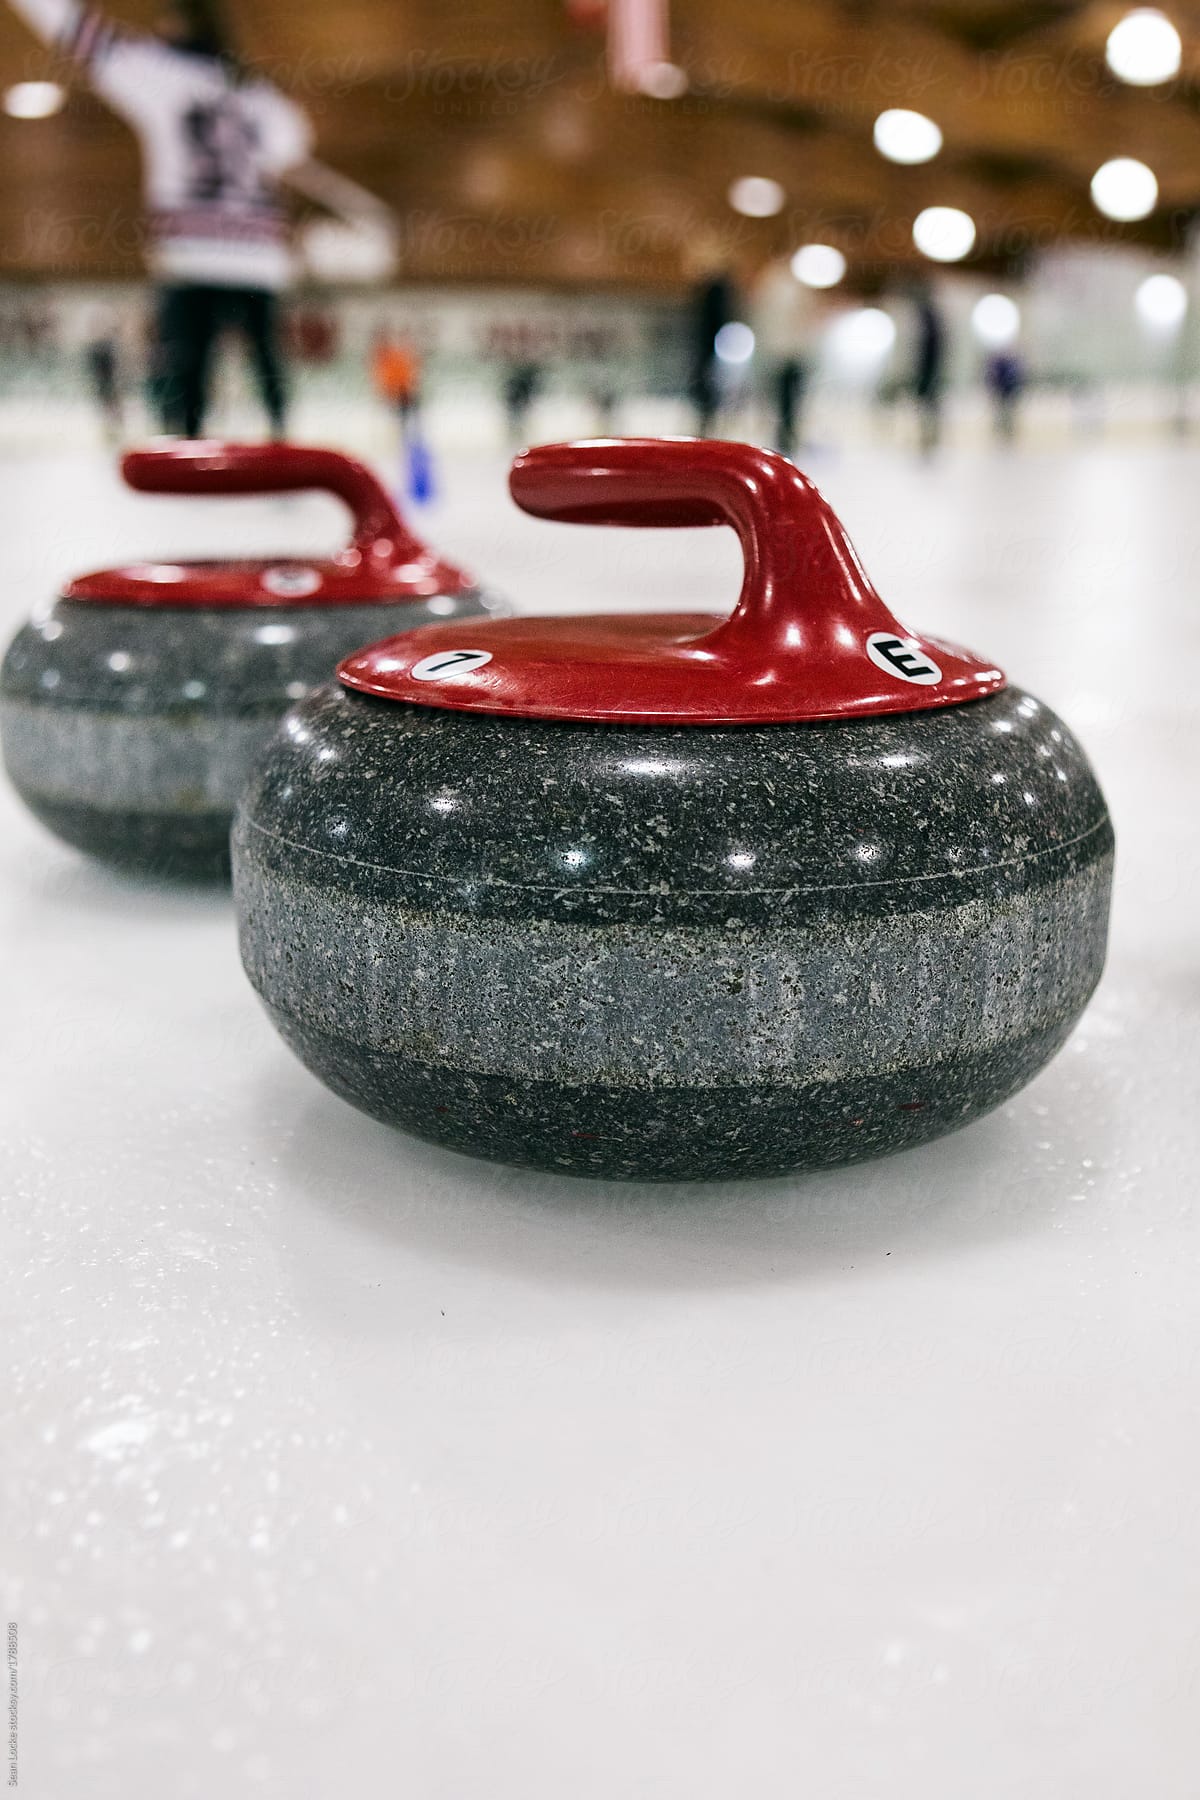 Curling: Red Team Stones Wait On Ice